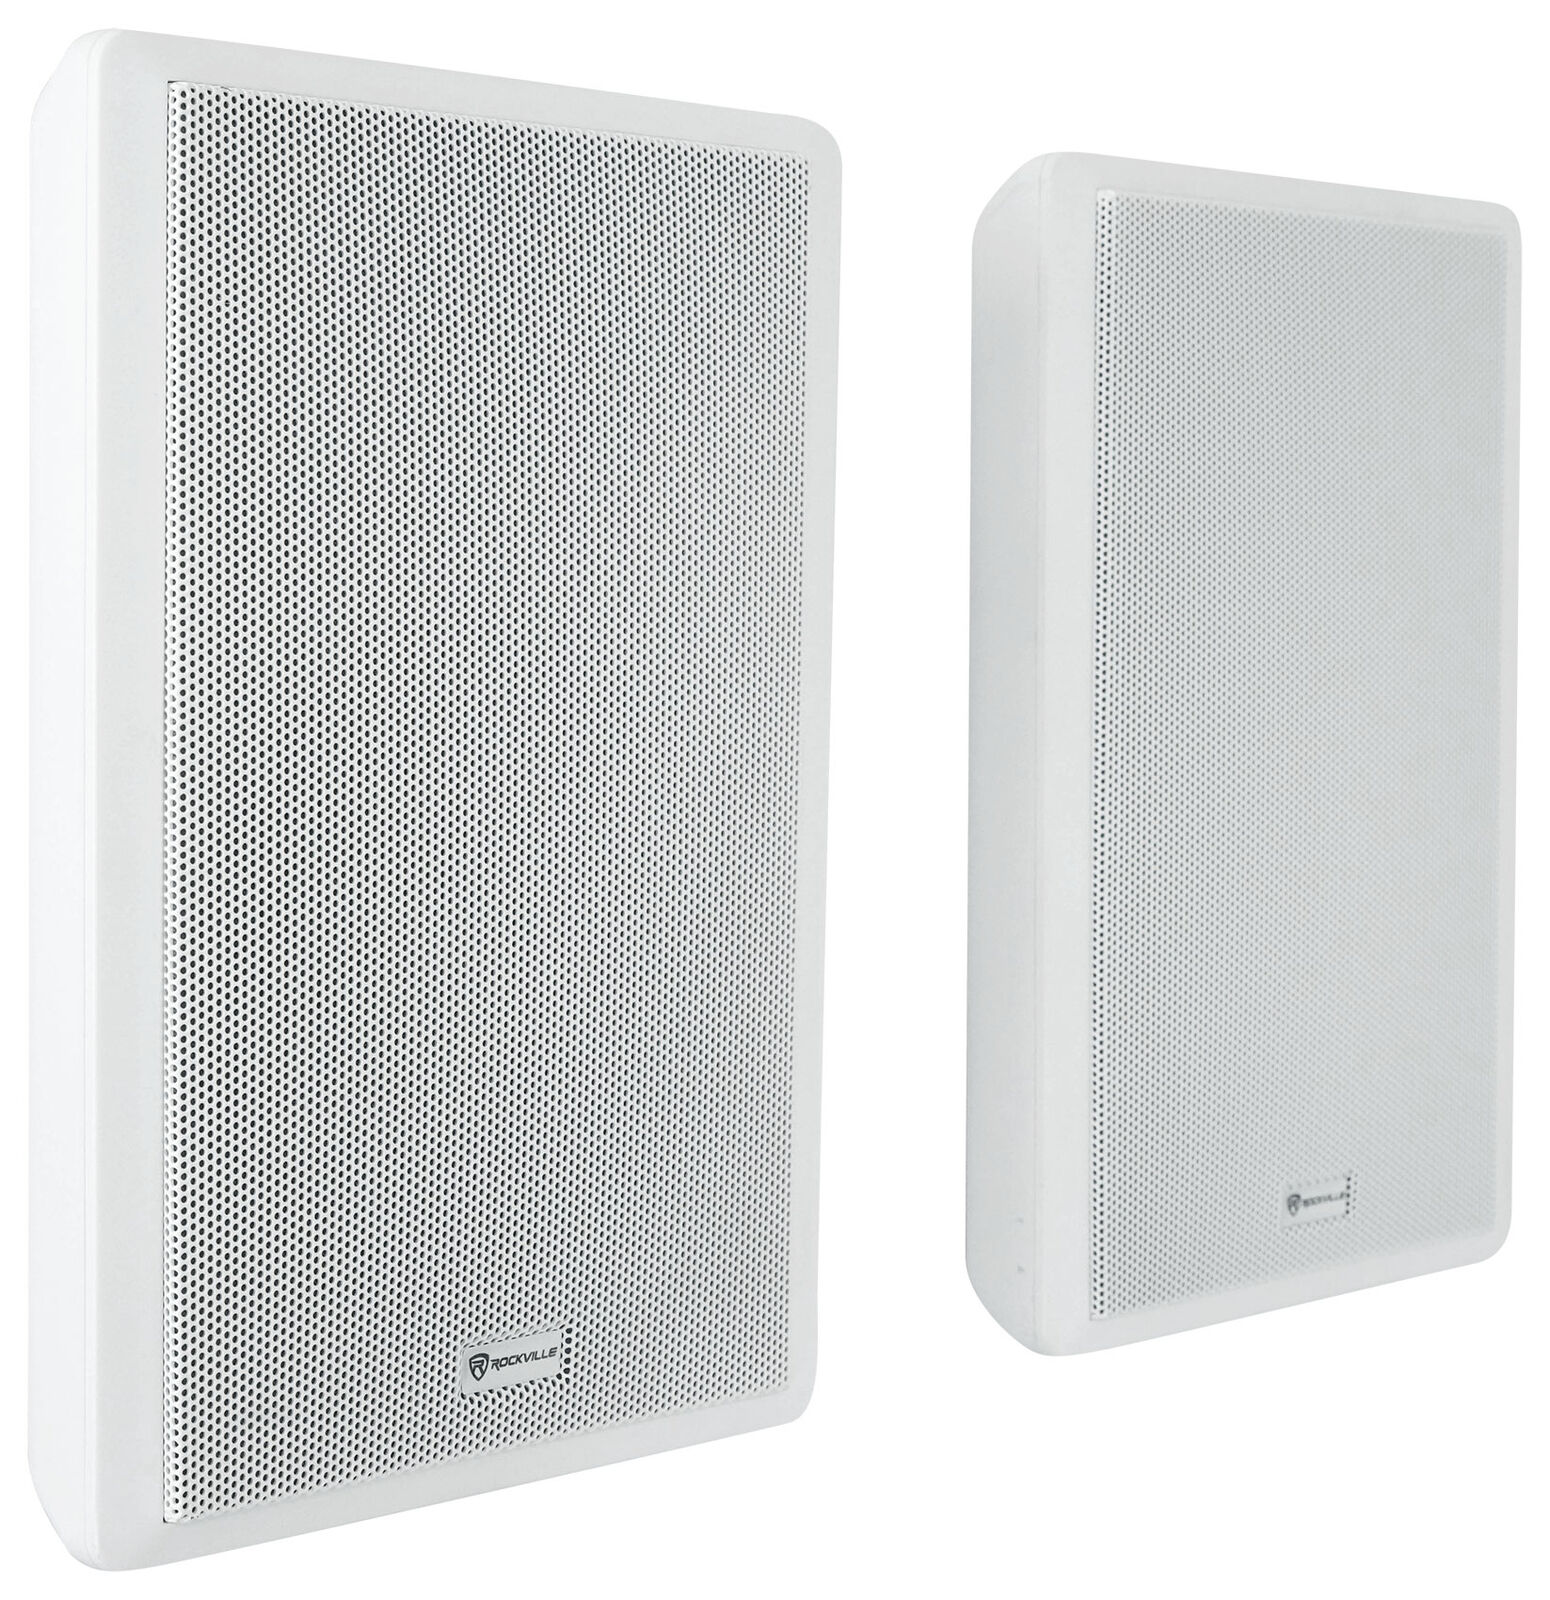 ROCKVILLE 6-Zone Home Audio Receiver+(4) 6.5" White Ceiling+(10) 5.25" Slim Wall Speakers